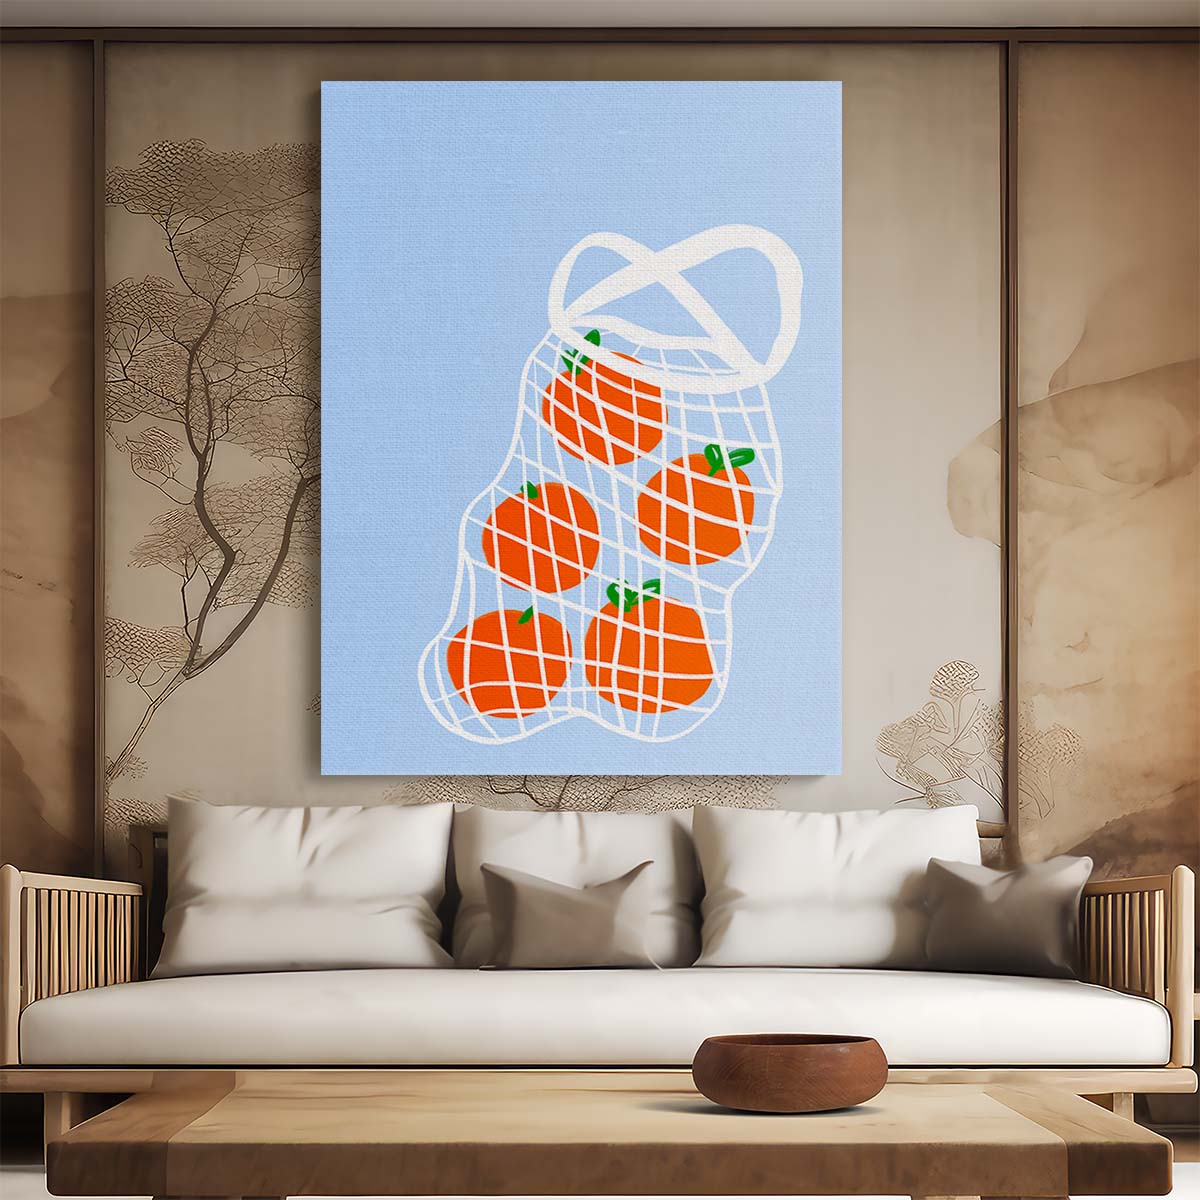 Minimalistic Orange Net Illustration - Colorful Kitchen Wall Art by Luxuriance Designs, made in USA